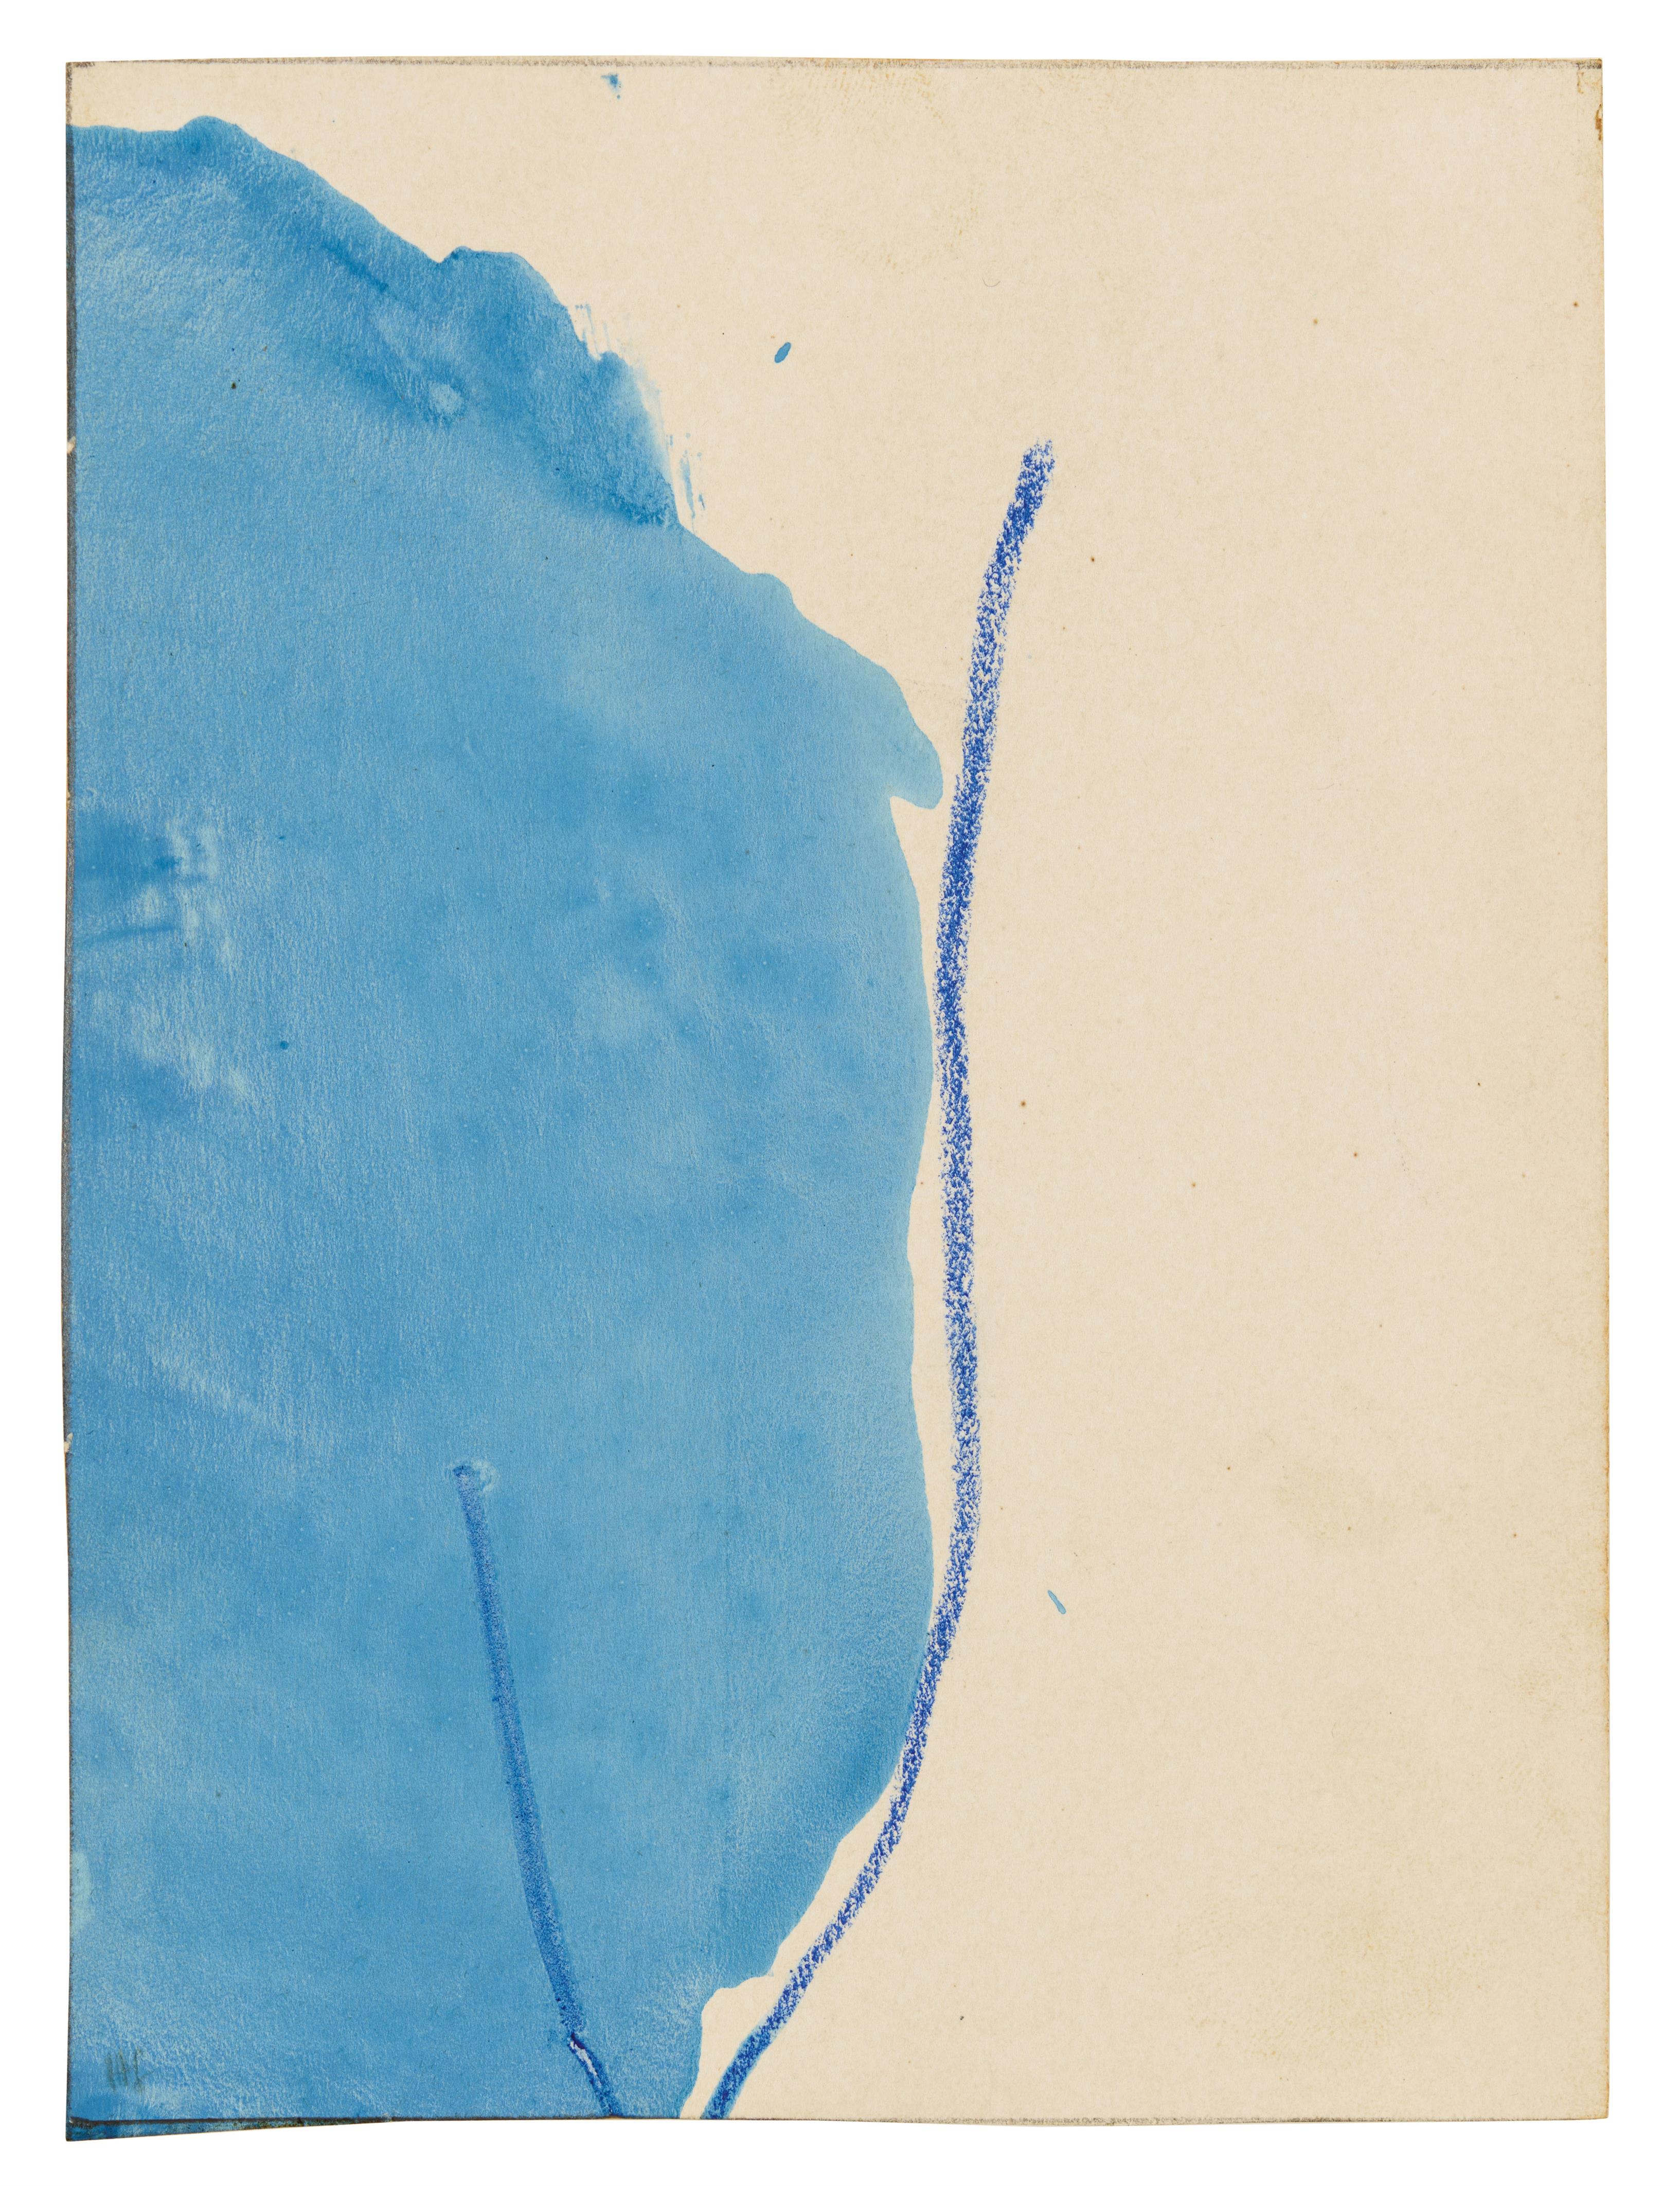 Helen Frankenthaler - Ohne Titel (Original cover for "The Blue Stairs", a book of poetry by Barbara Guest) - image-1